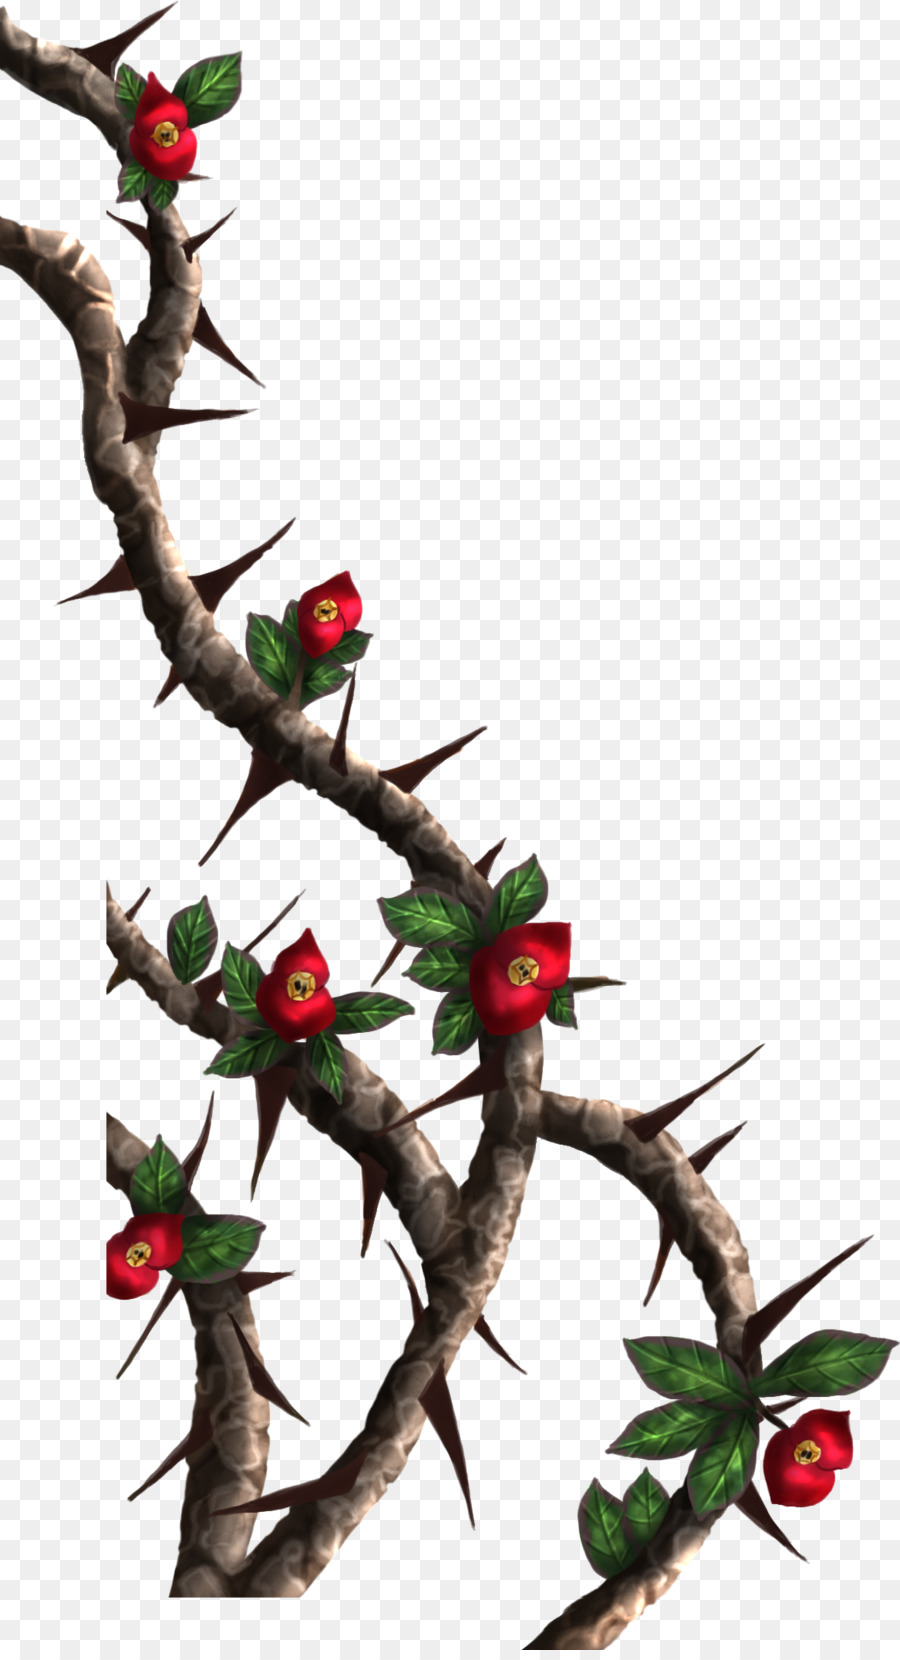 Thorns, spines, and prickles Rose Crown of thorns Drawing Clip art